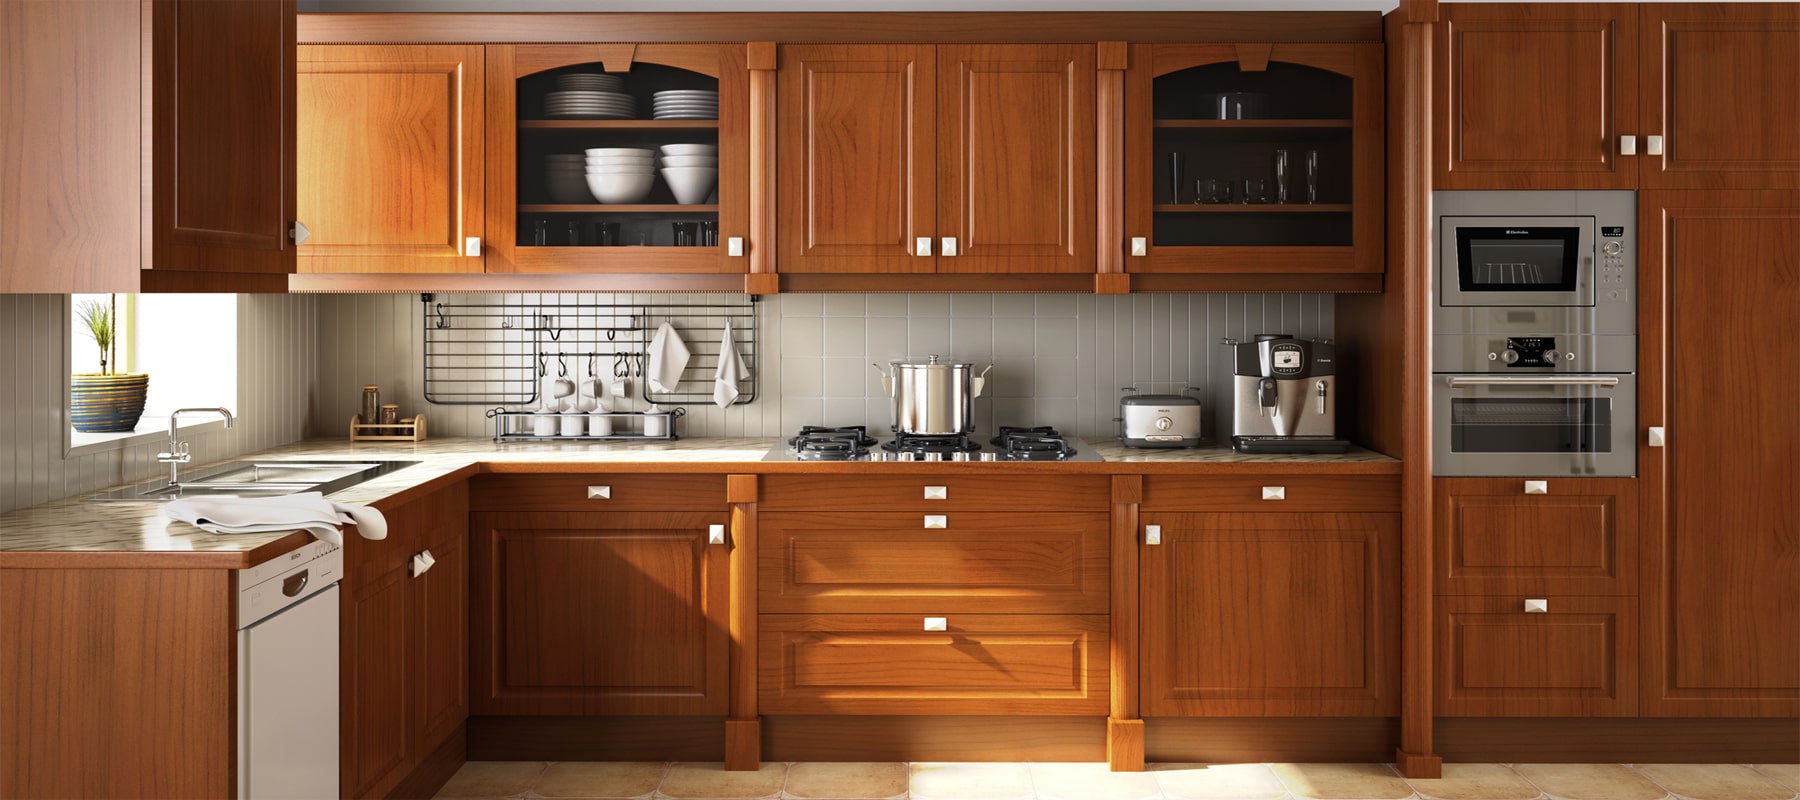 Cherry Kitchen Cabinets Cost